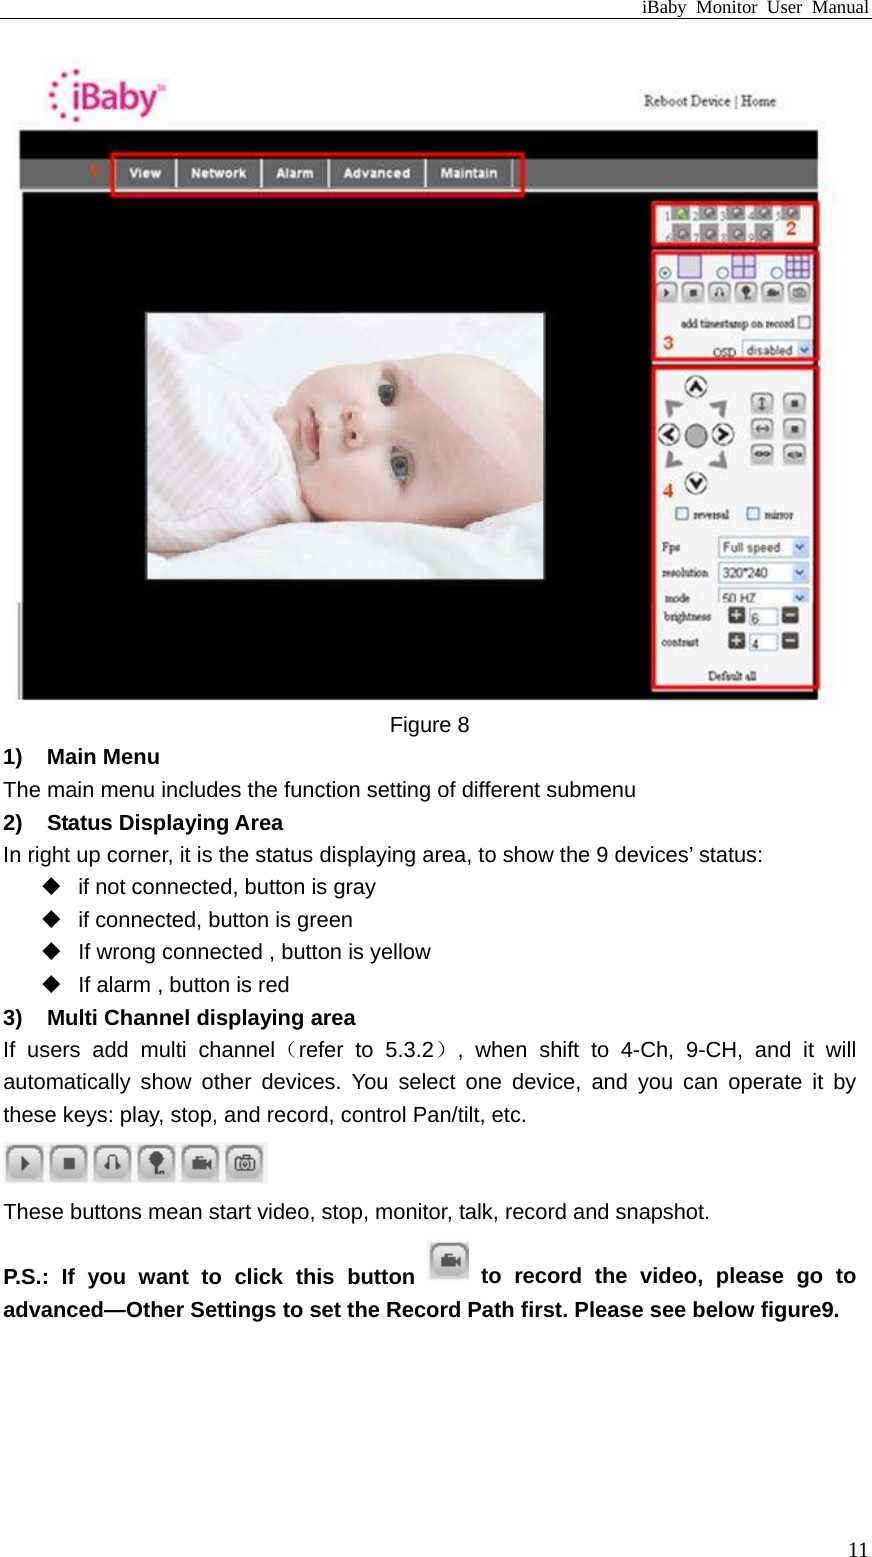 iBaby Monitor User Manual  Figure 8 1) Main Menu The main menu includes the function setting of different submenu 2) Status Displaying Area In right up corner, it is the status displaying area, to show the 9 devices’ status:   if not connected, button is gray   if connected, button is green   If wrong connected , button is yellow   If alarm , button is red 3)  Multi Channel displaying area If users add multi channel（refer to 5.3.2）, when shift to 4-Ch, 9-CH, and it will automatically show other devices. You select one device, and you can operate it by these keys: play, stop, and record, control Pan/tilt, etc.   These buttons mean start video, stop, monitor, talk, record and snapshot.   P.S.: If you want to click this button   to record the video, please go to advanced—Other Settings to set the Record Path first. Please see below figure9.  11